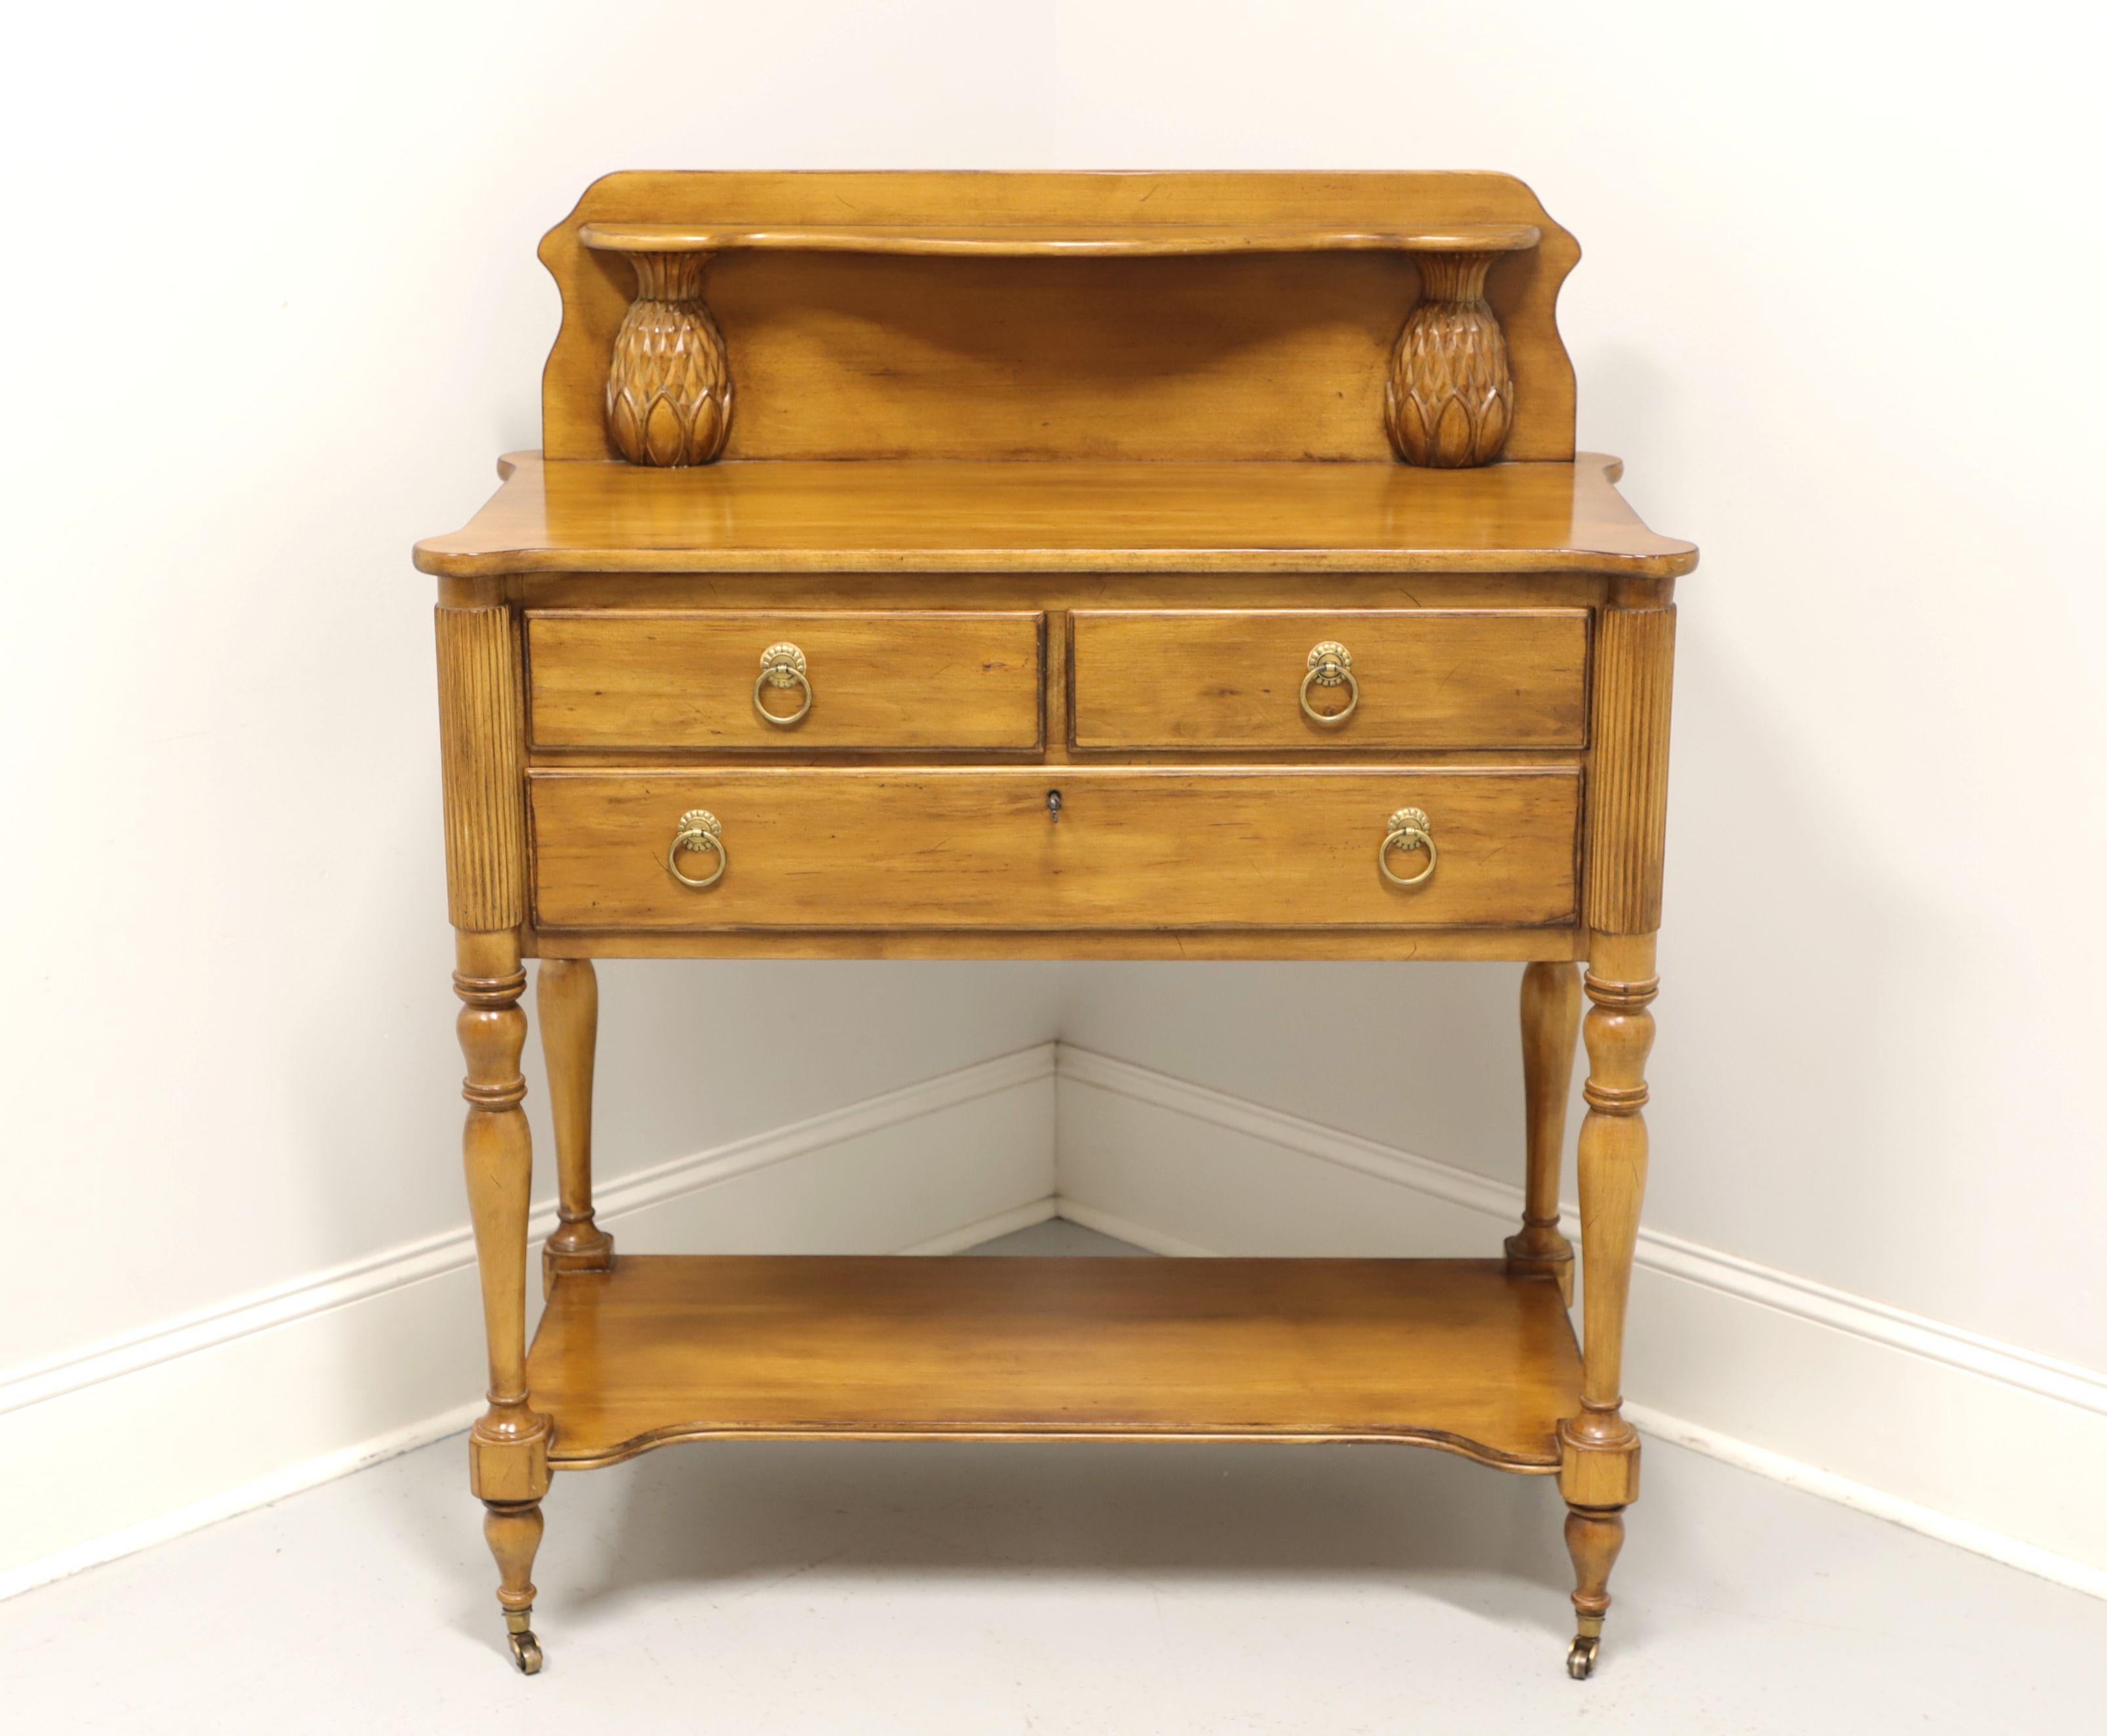 A French Country style server by Lexington, from their The Southern Living Collection. Fruitwood with brass hardware, upper gallery with carved pineapples supporting small shelf, rounded corners, undertier shelf, fluted and turned legs with brass